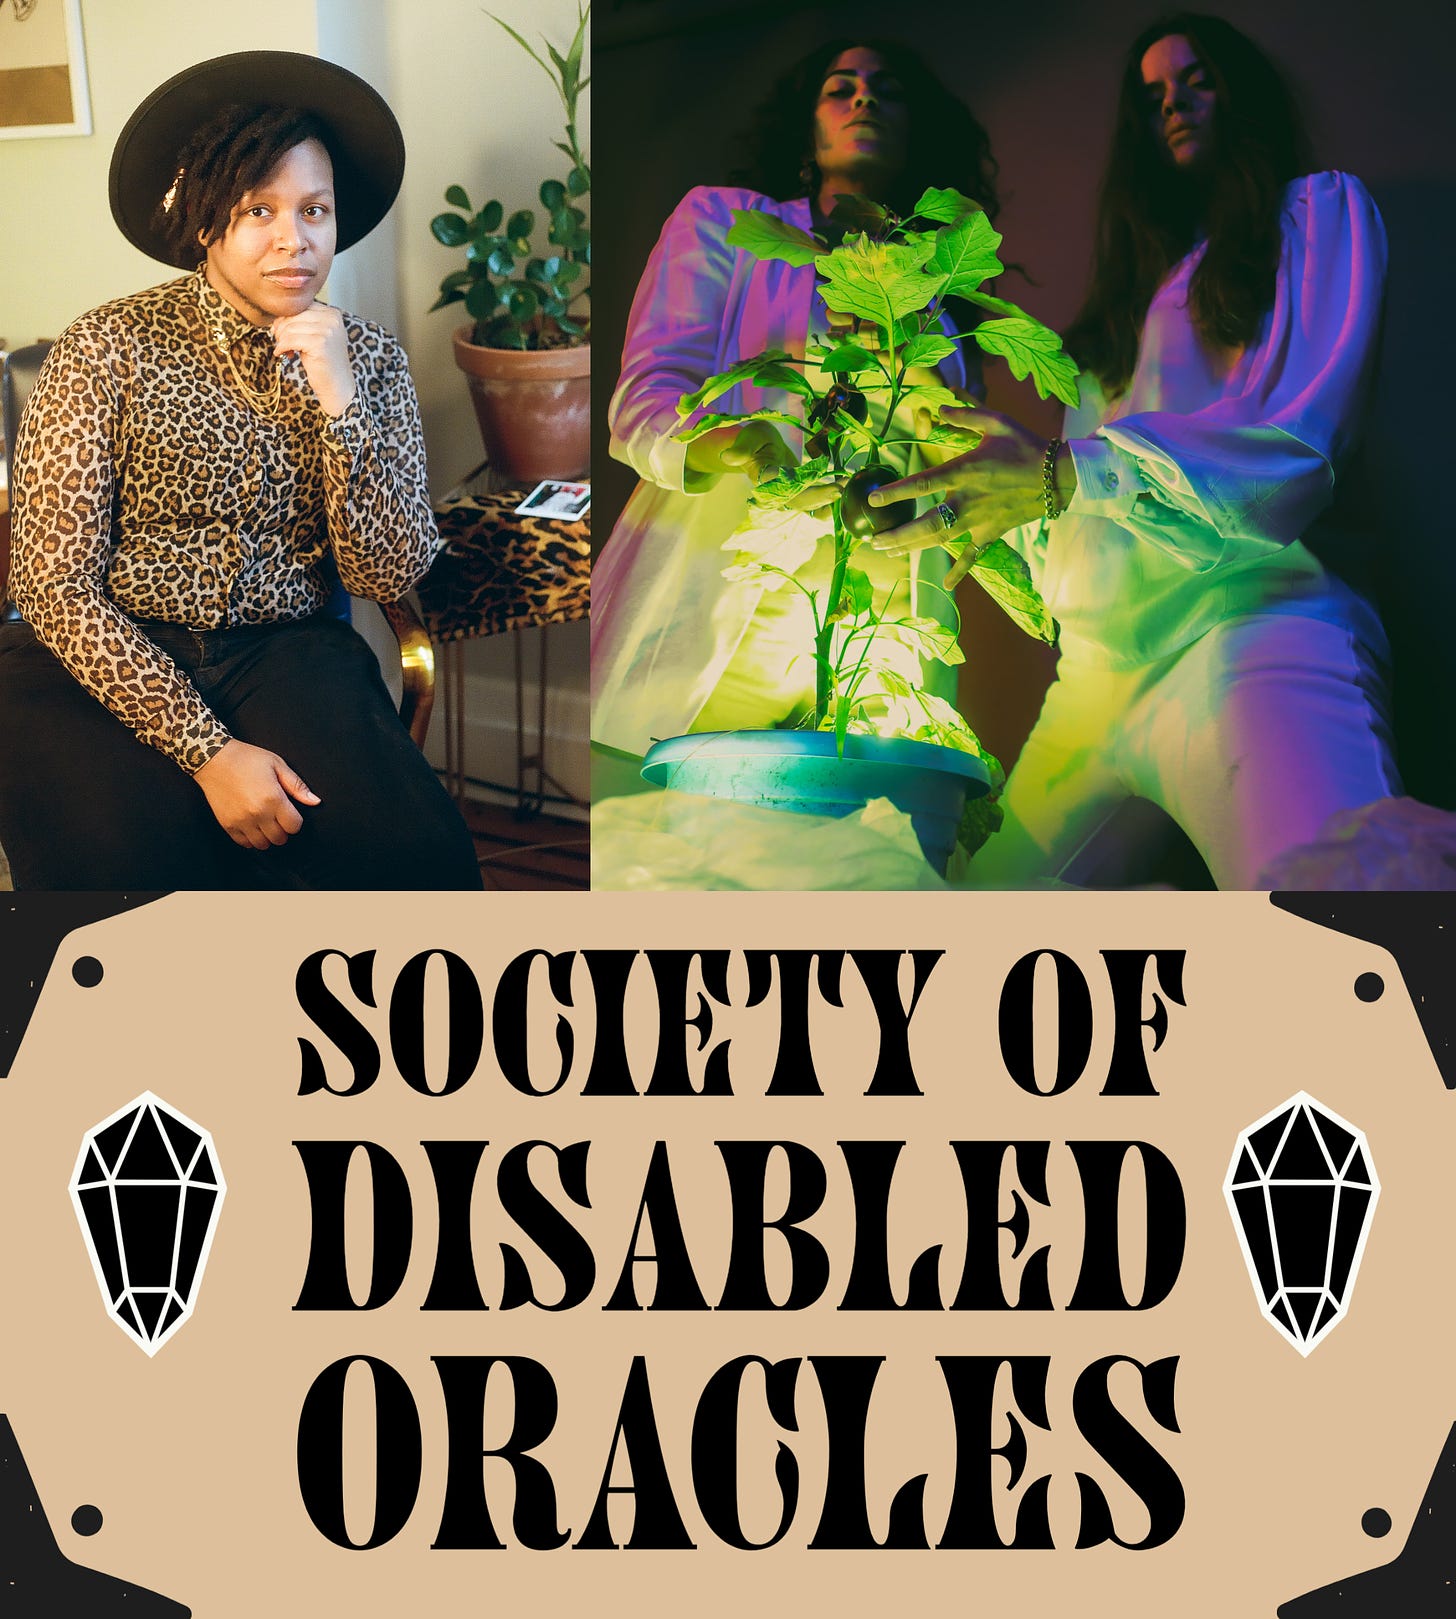 Cyree Jarelle Johnson, a black trans person in a leopard print shirt and a black hat sits in a blue rolling chair with his chin resting on his fist. Nocturnal Medicine’s image shows two people kneeling next to a brightly lit plant, touching its leaves and black bulbous prosthetics that are attached to its stems. They are dressed in white that catches a purple glow at their shoulders, under medium-length brown hair, and green at their waists. they have calm expressions, looking down past the plant at the camera. The logo of the Society of Disabled Oracles is a plate that might adorn the outside of a building. The all-caps words are in a fancy, curvaceous font flanked by drawings of two angular stones.